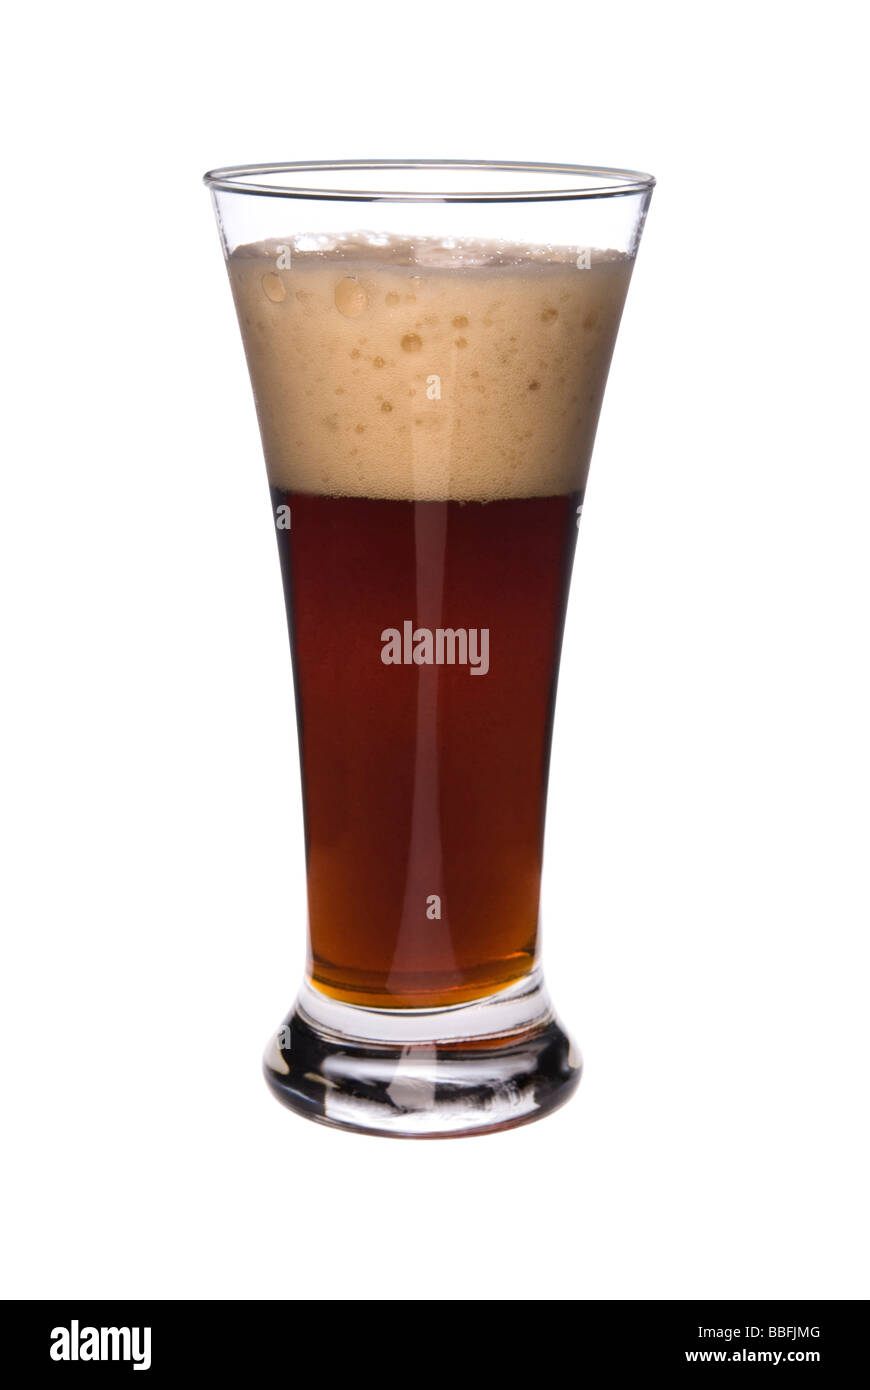 A glass of dark rich beer isolated on a white background Image was shot against a lighted white backdrop and is not a cutout Stock Photo